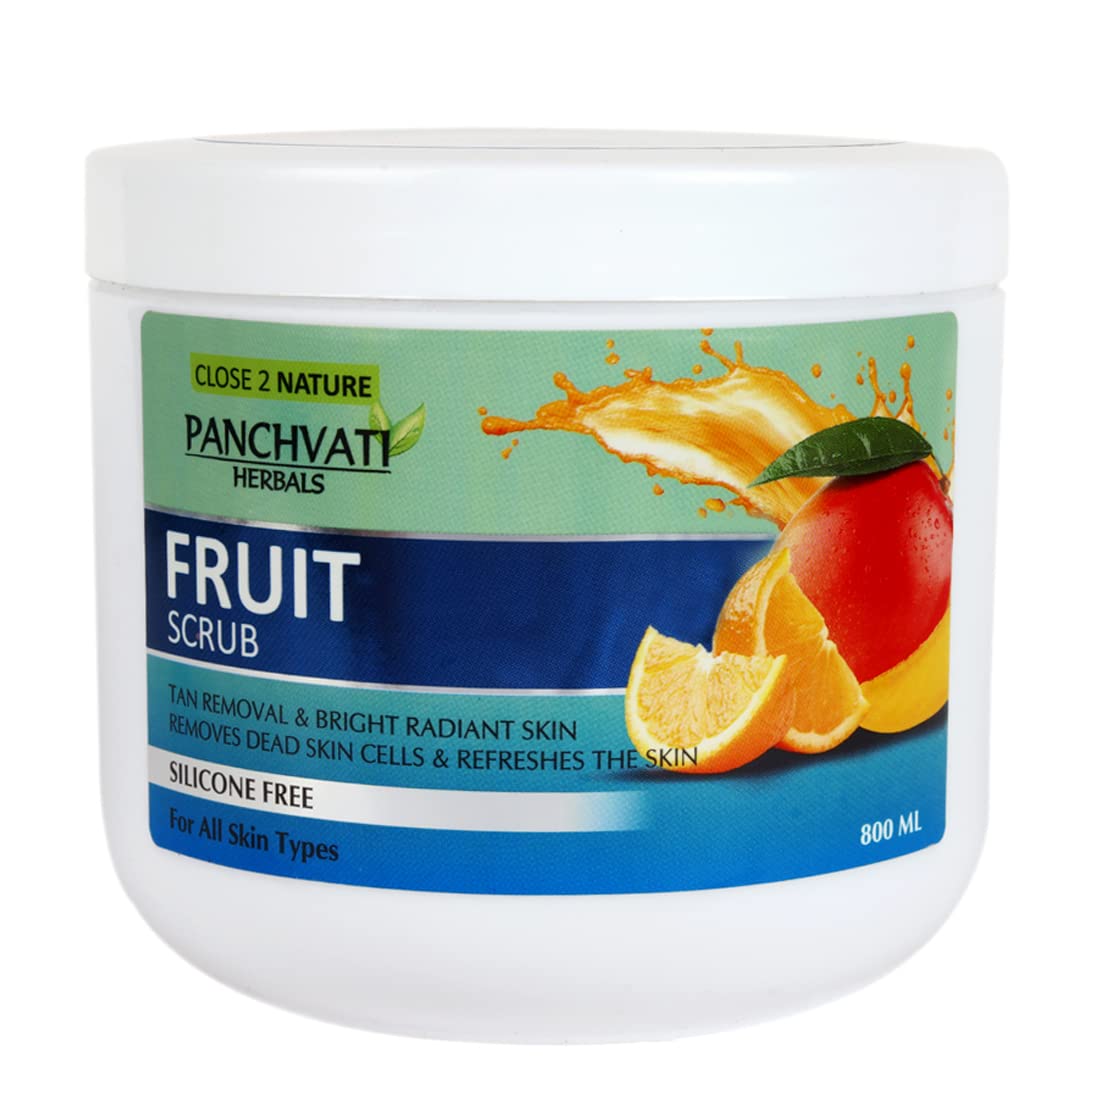 Panchvati Herbals Fruit Scrub for Bright, Light & Smooth Skin - 800 ml Silicone free & All tyeps skin